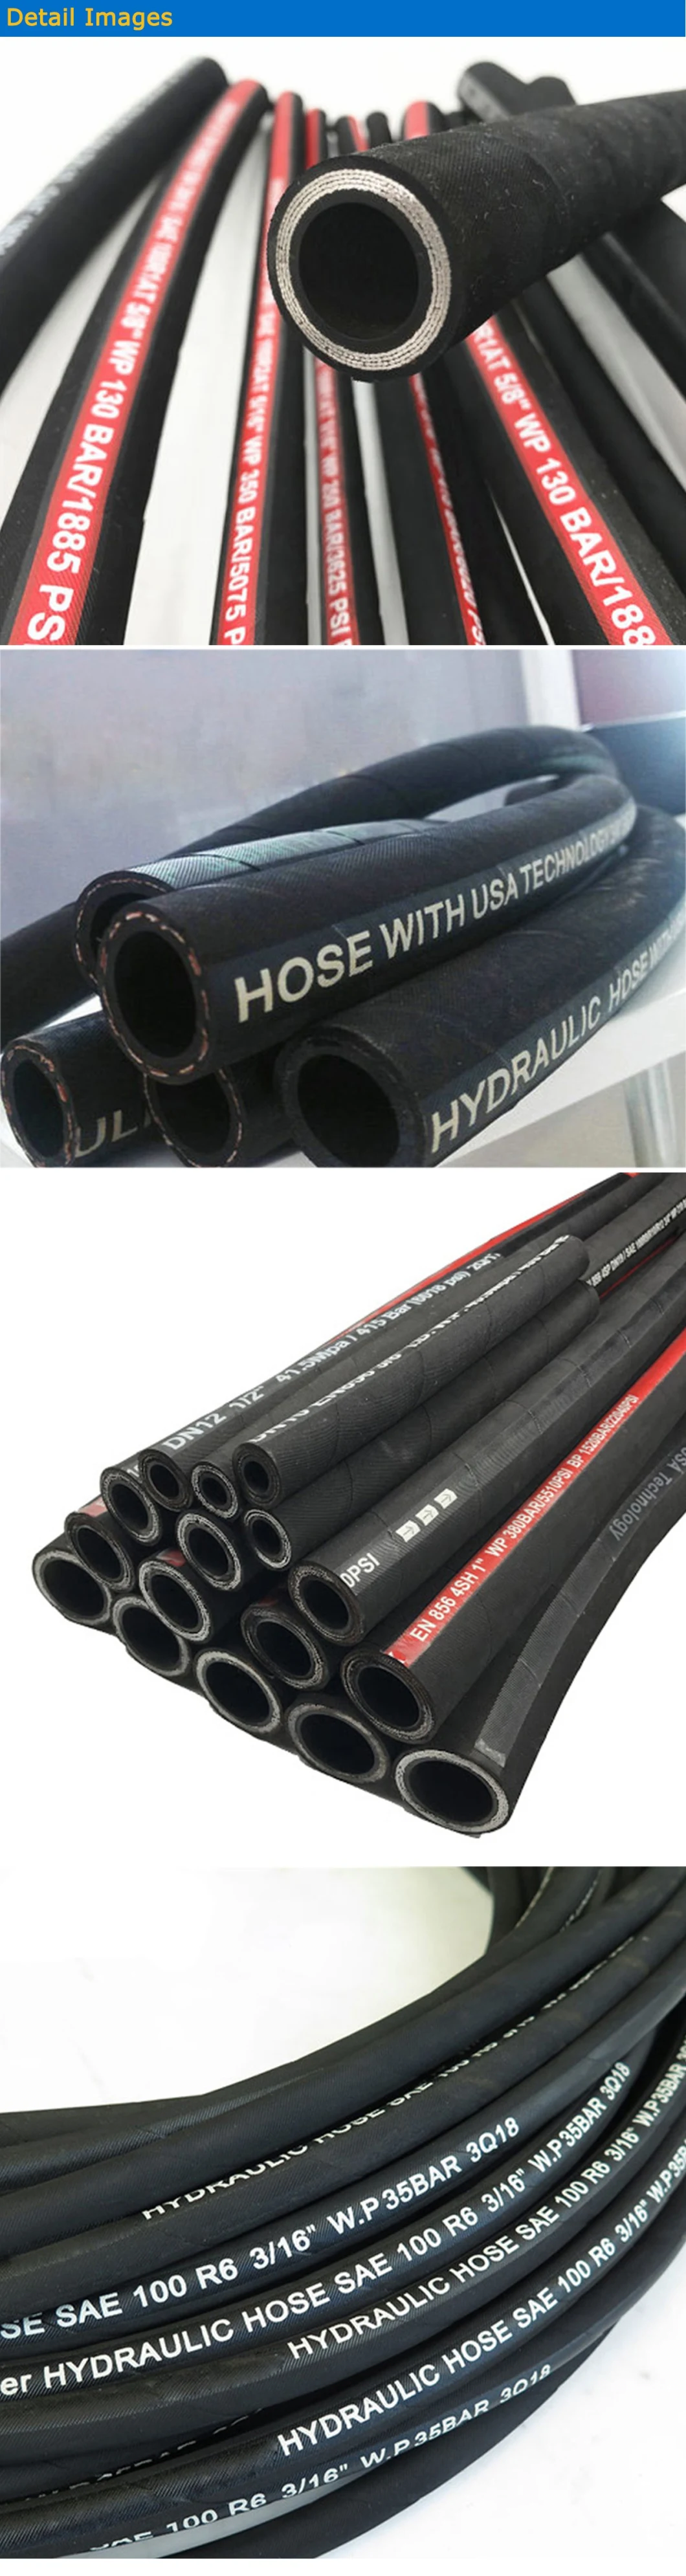 Diesel Fuel Oil Transfer Hose Oil Suction and Delivery Hose